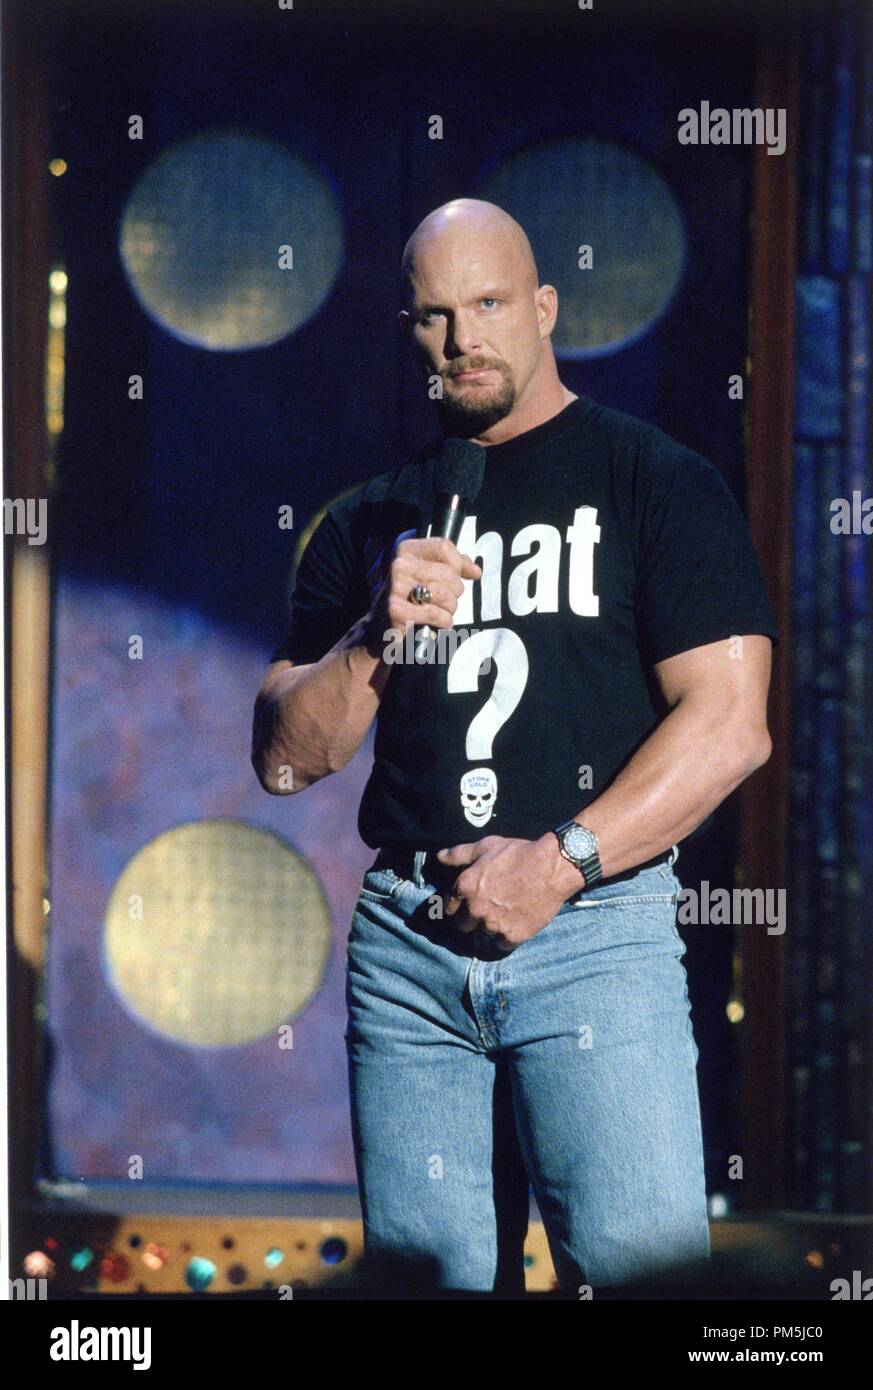 Film Still / Publicity Still from 'Mad TV' Stone Cold Steve Austin 2002 Photo Credit: Randy Holmes   File Reference # 30754604THA  For Editorial Use Only -  All Rights Reserved Stock Photo